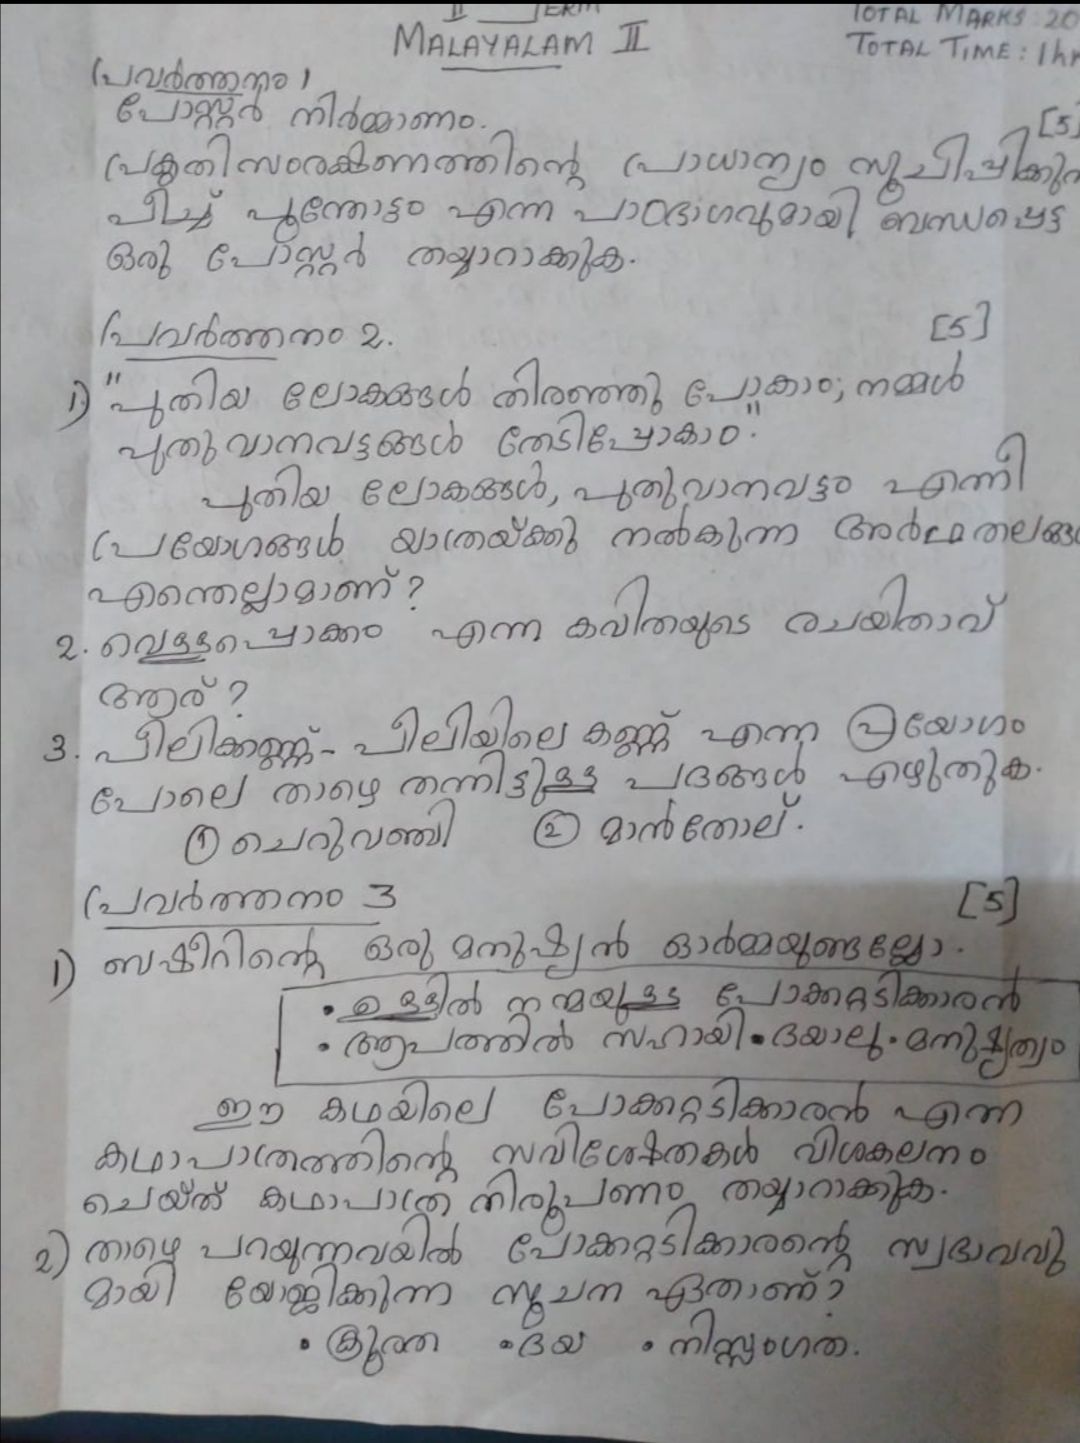 what is the assignment meaning in malayalam